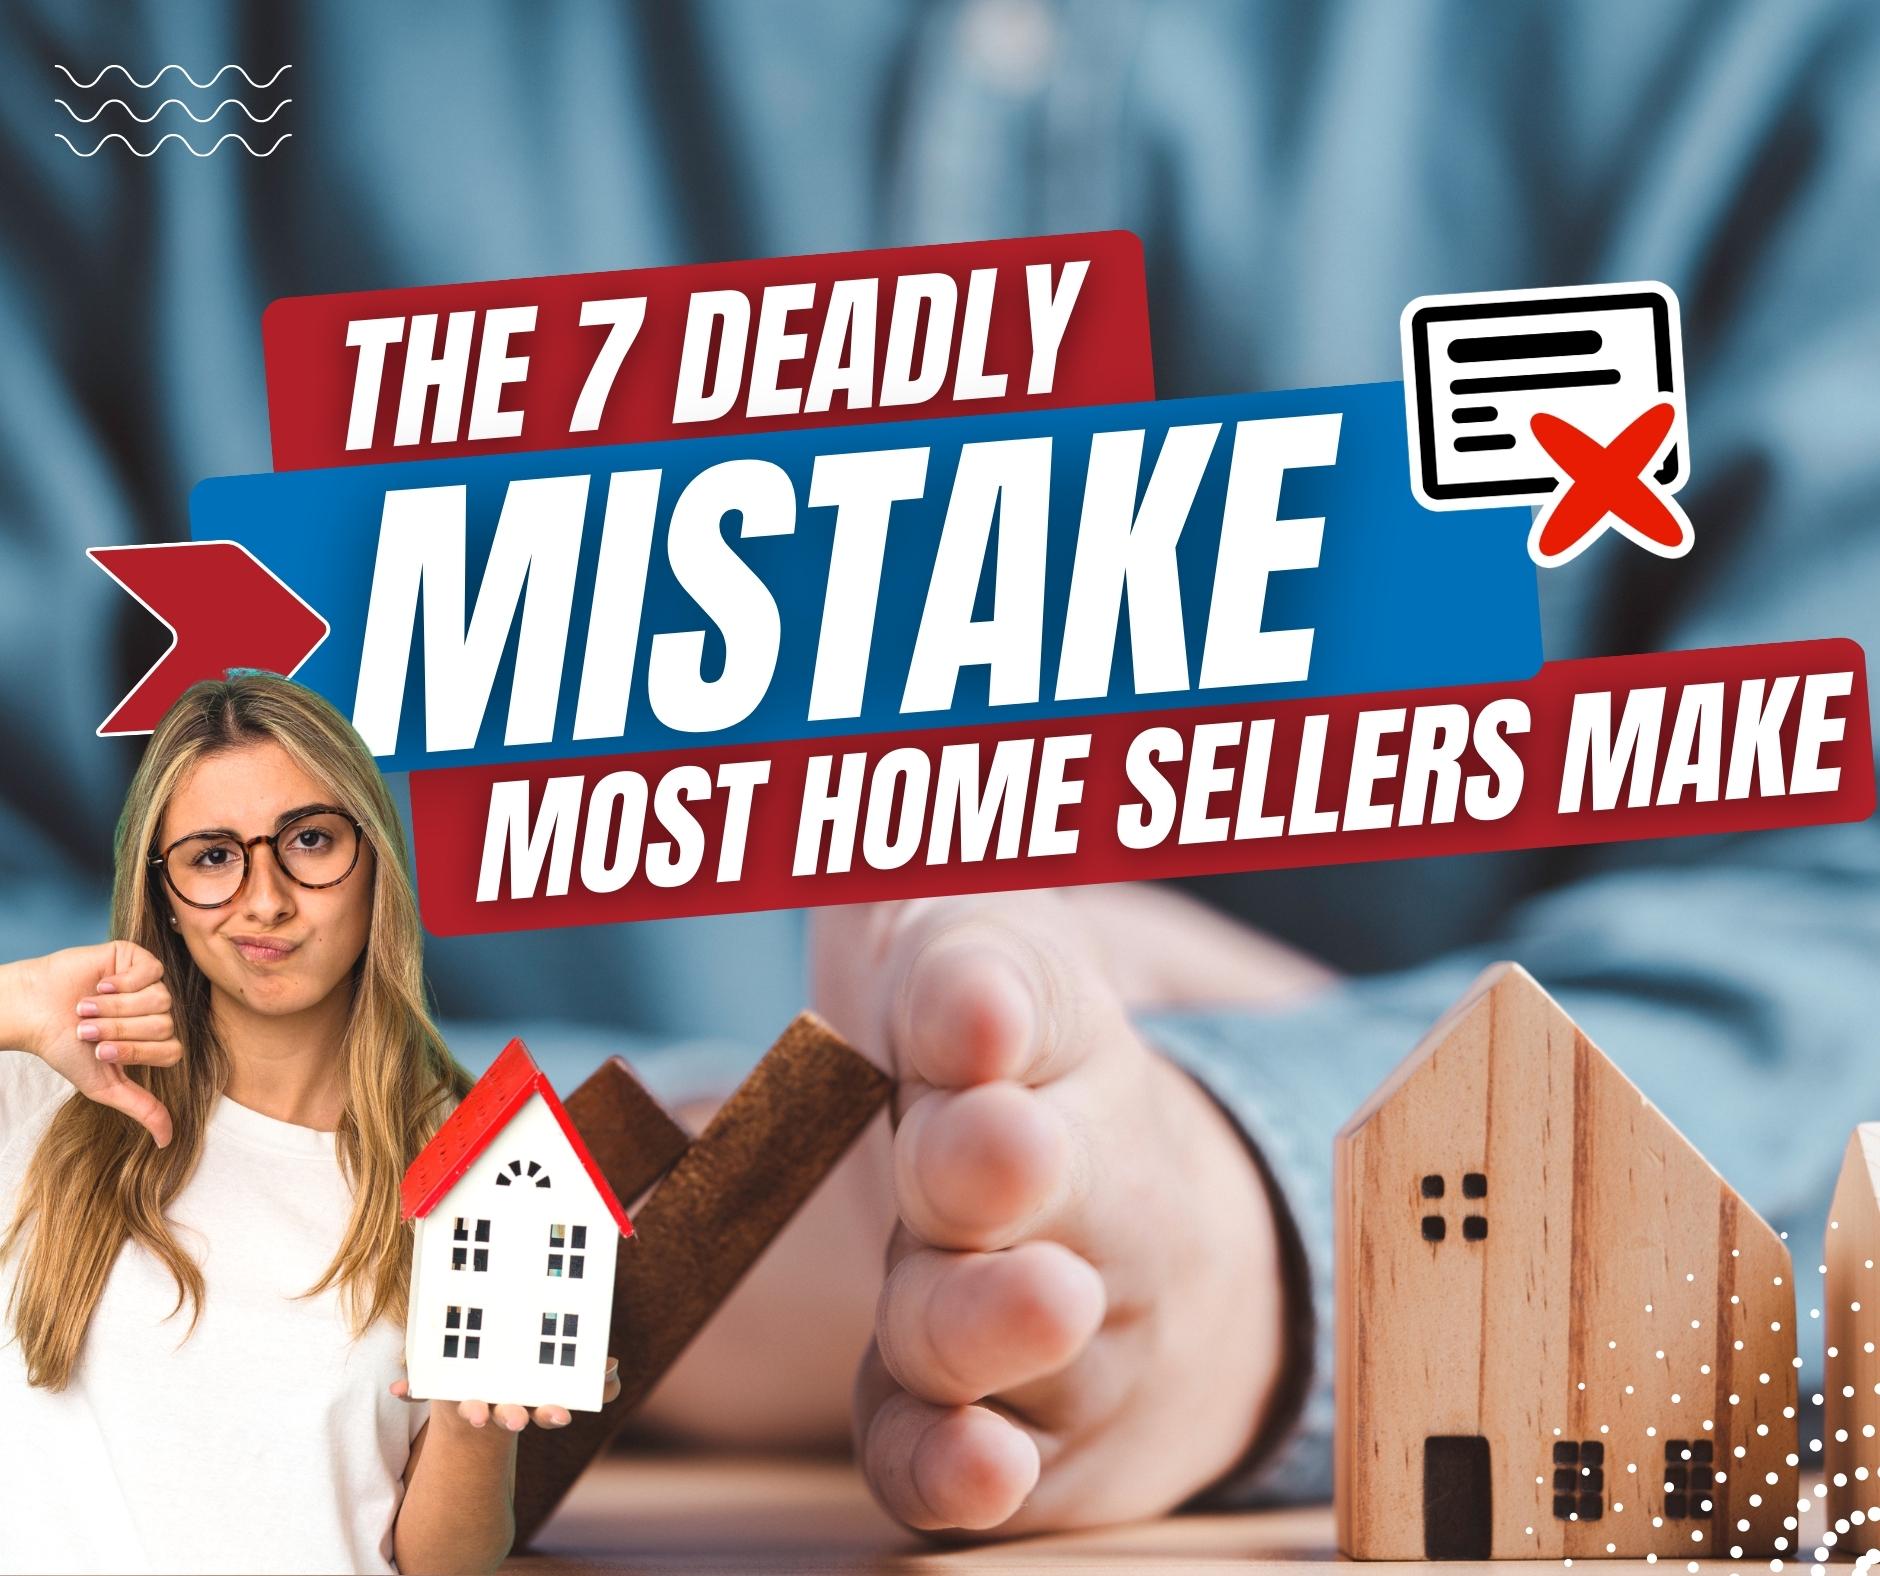 The 7 Deadly Mistakes Most Home Sellers Make